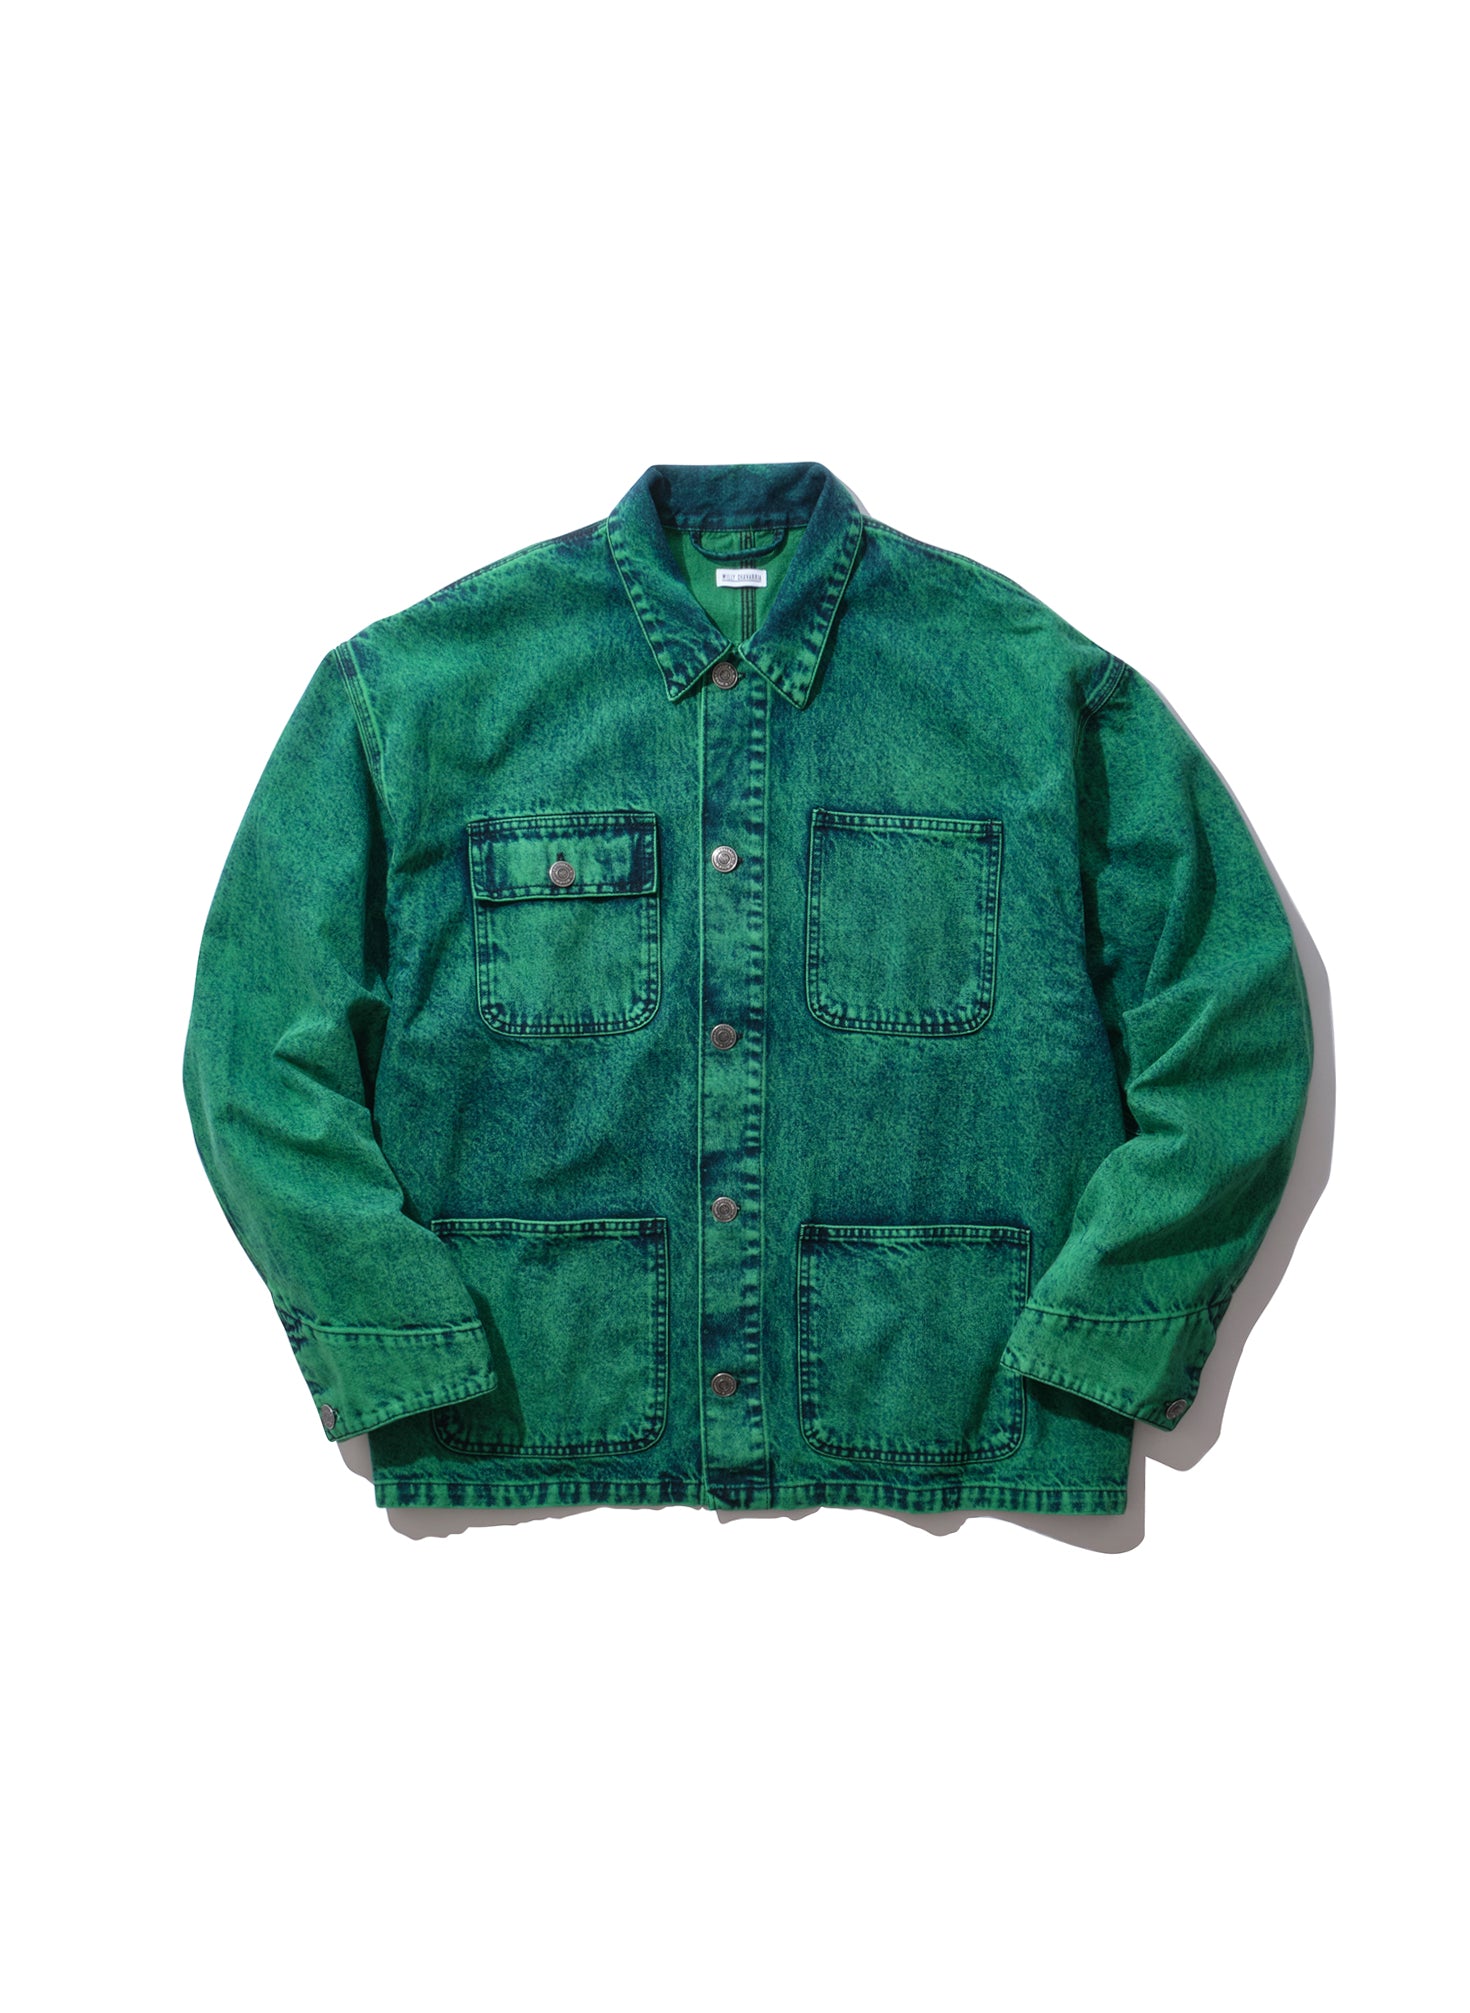 Last One WILLY CHAVARRIA / BIG DADDY JACKET OVERD GREEN